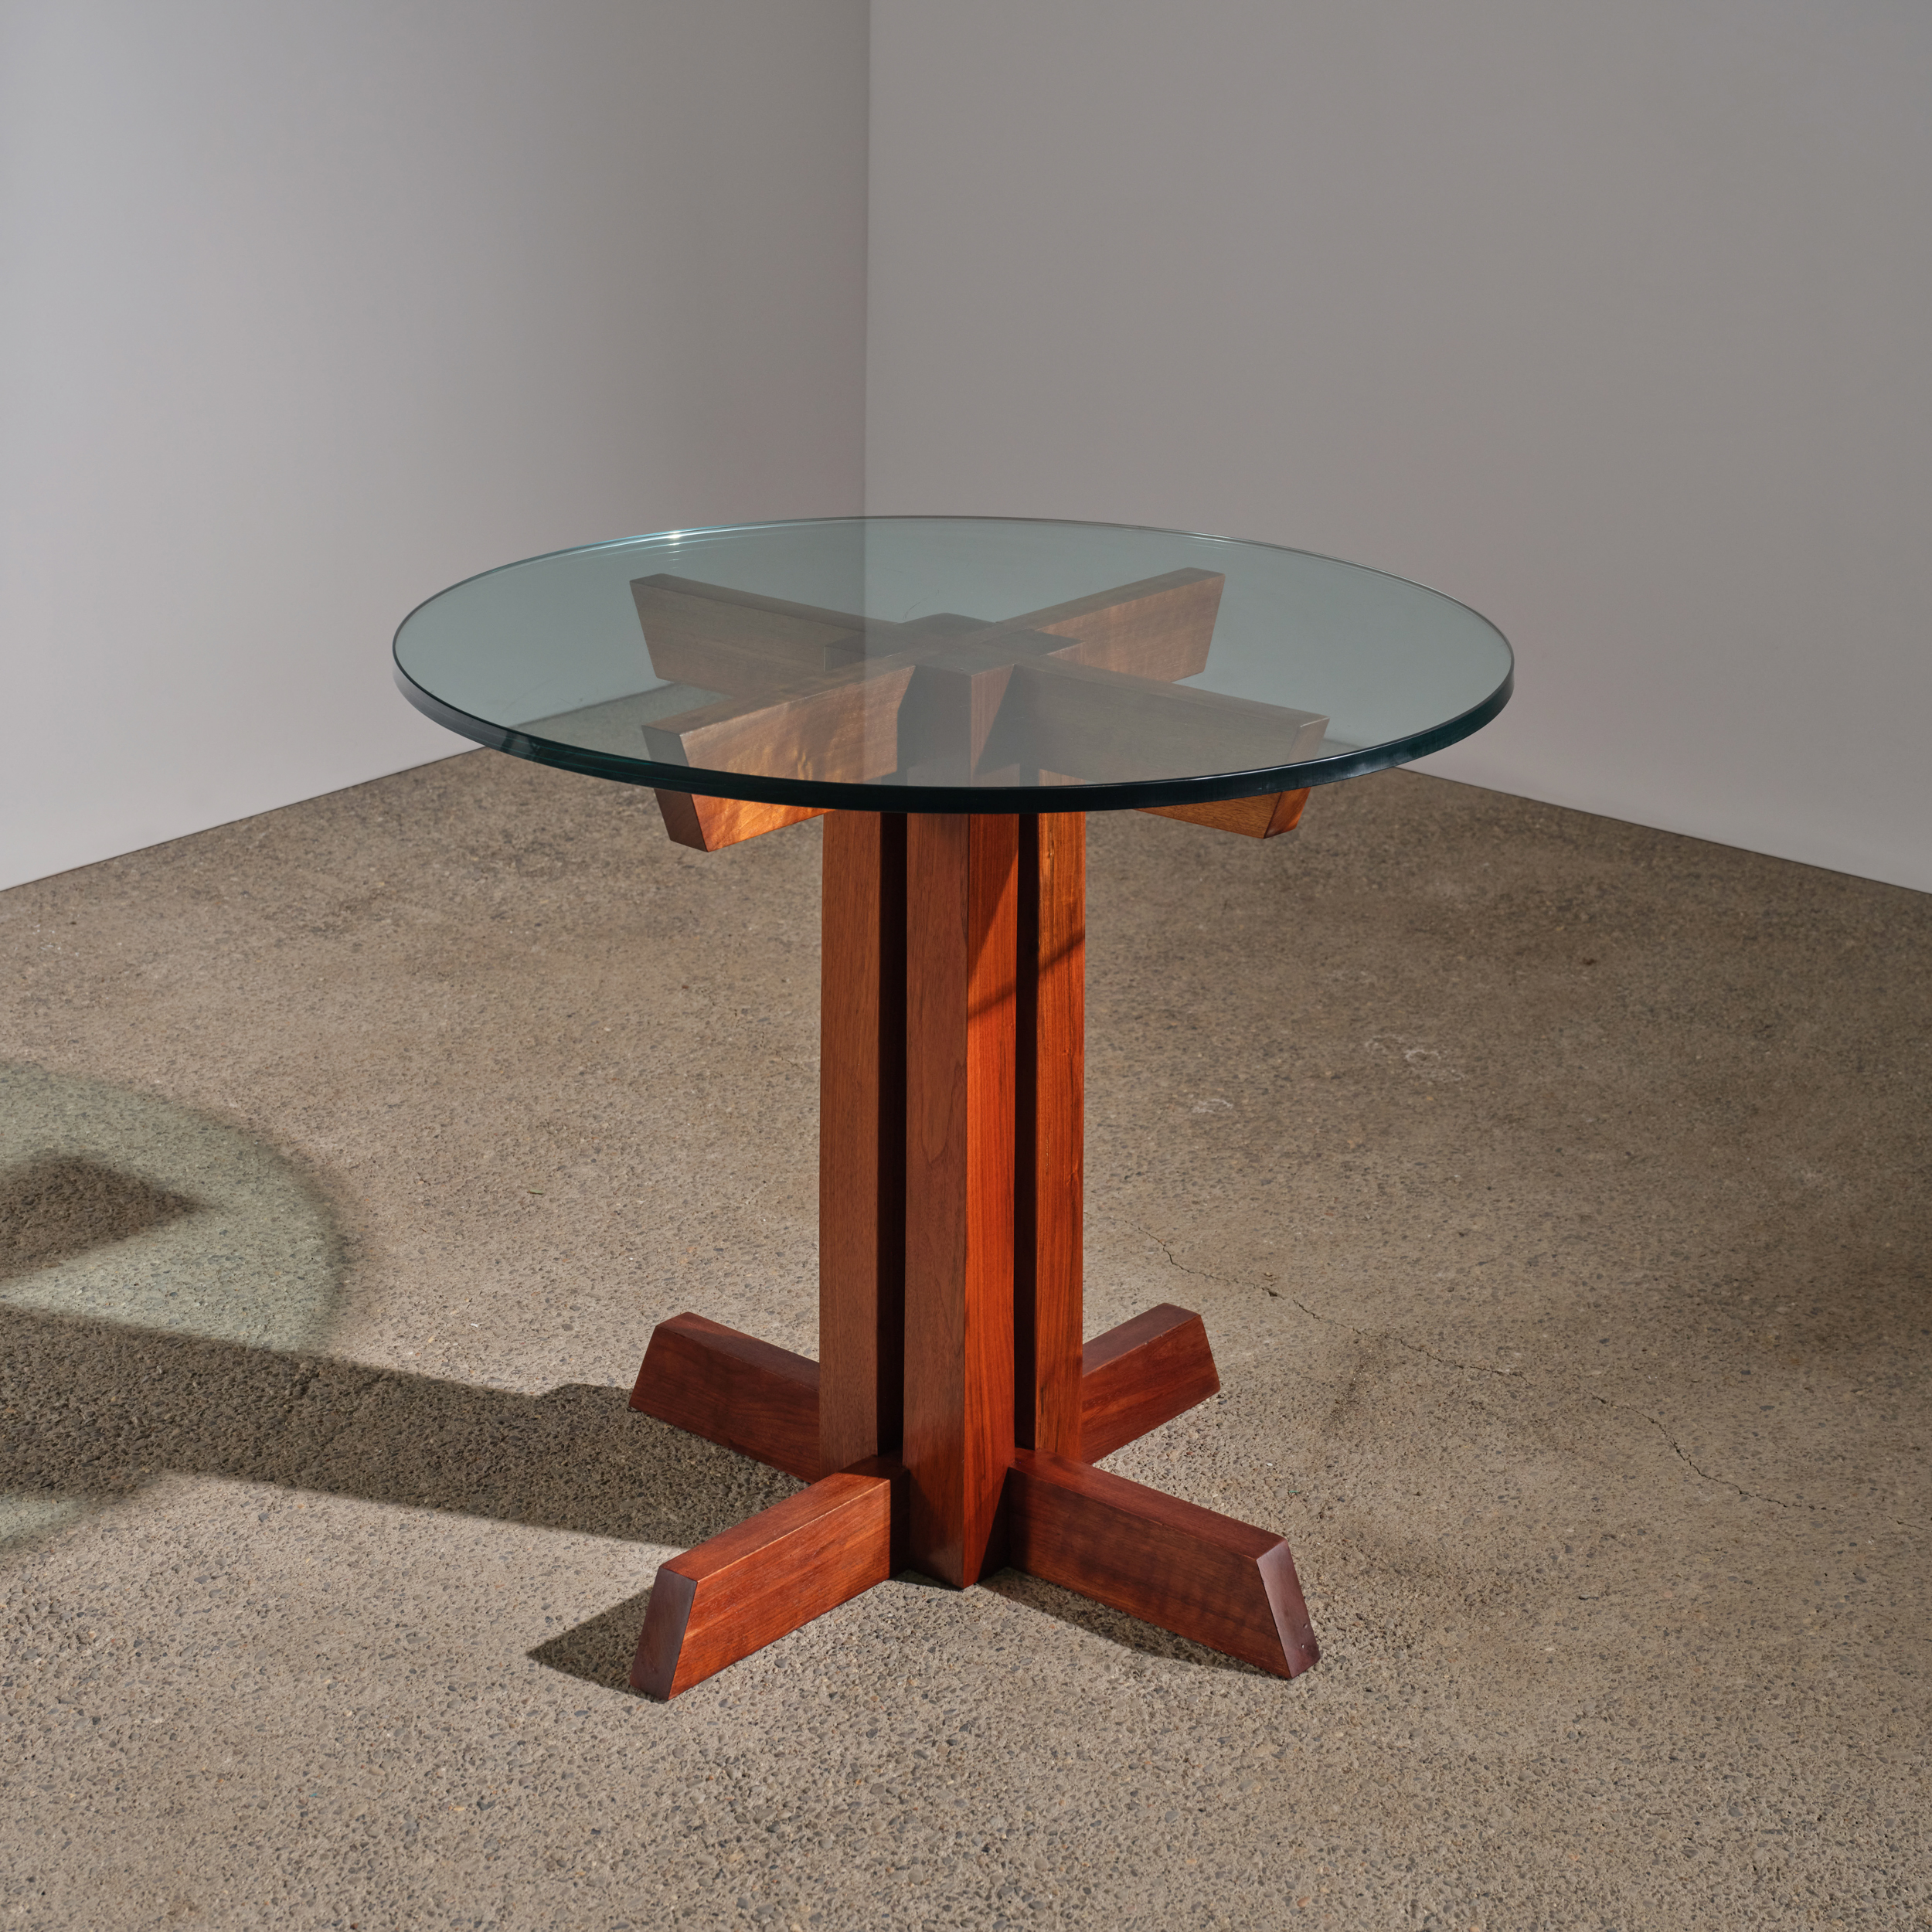 George Nakashima - Round Cluster-Base Table with Glass Top